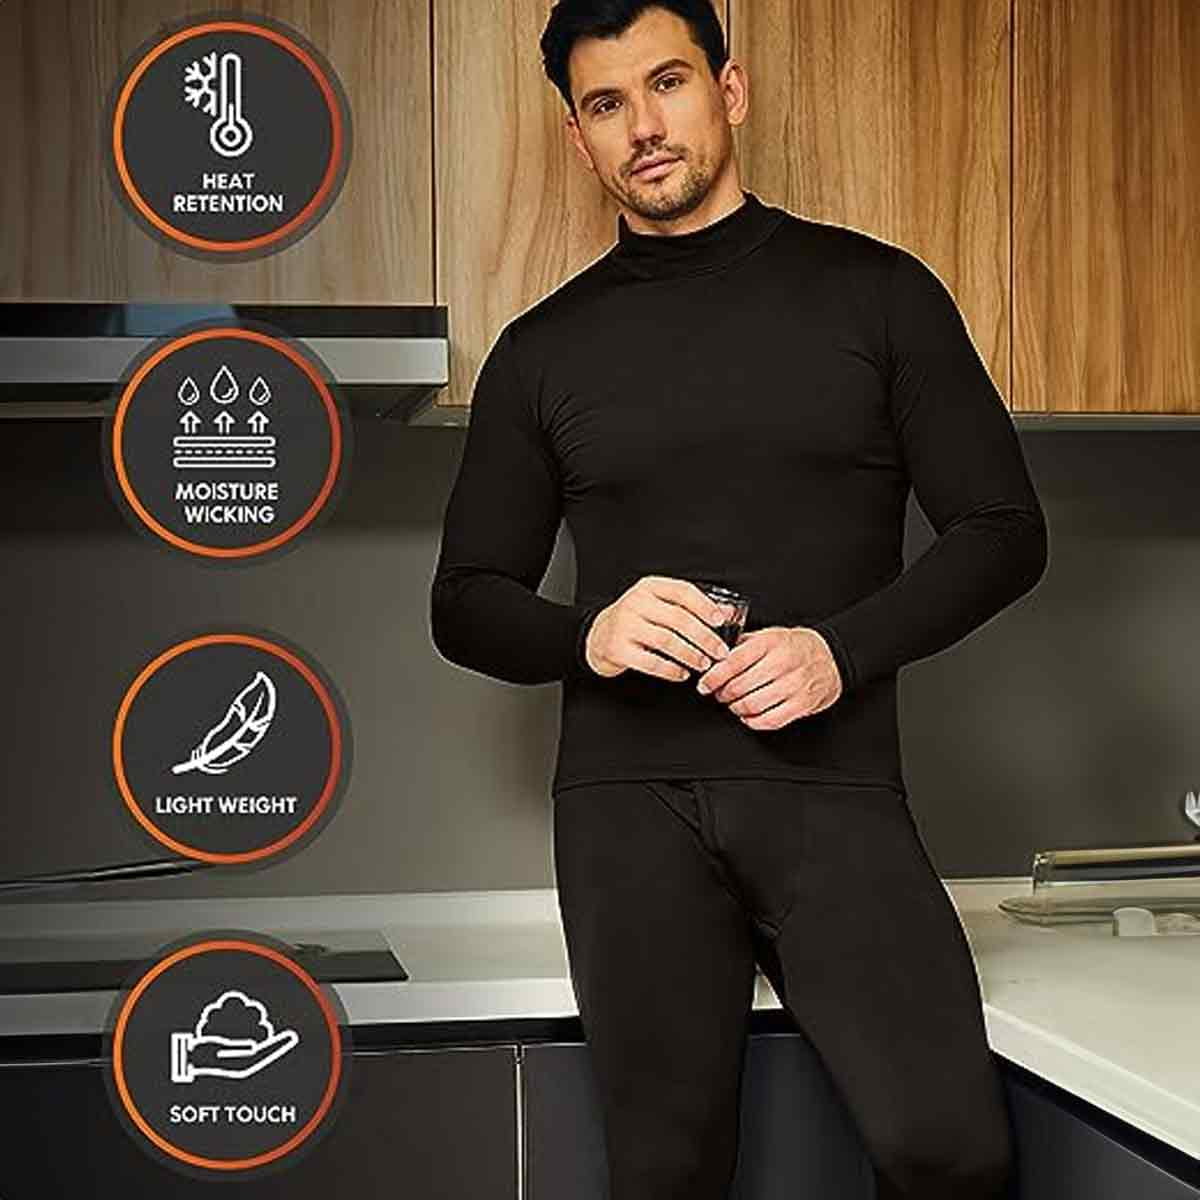 Mens Thermal Underwear Set, Fleece Long Johns for Men Extreme Cold Winter -  XL 